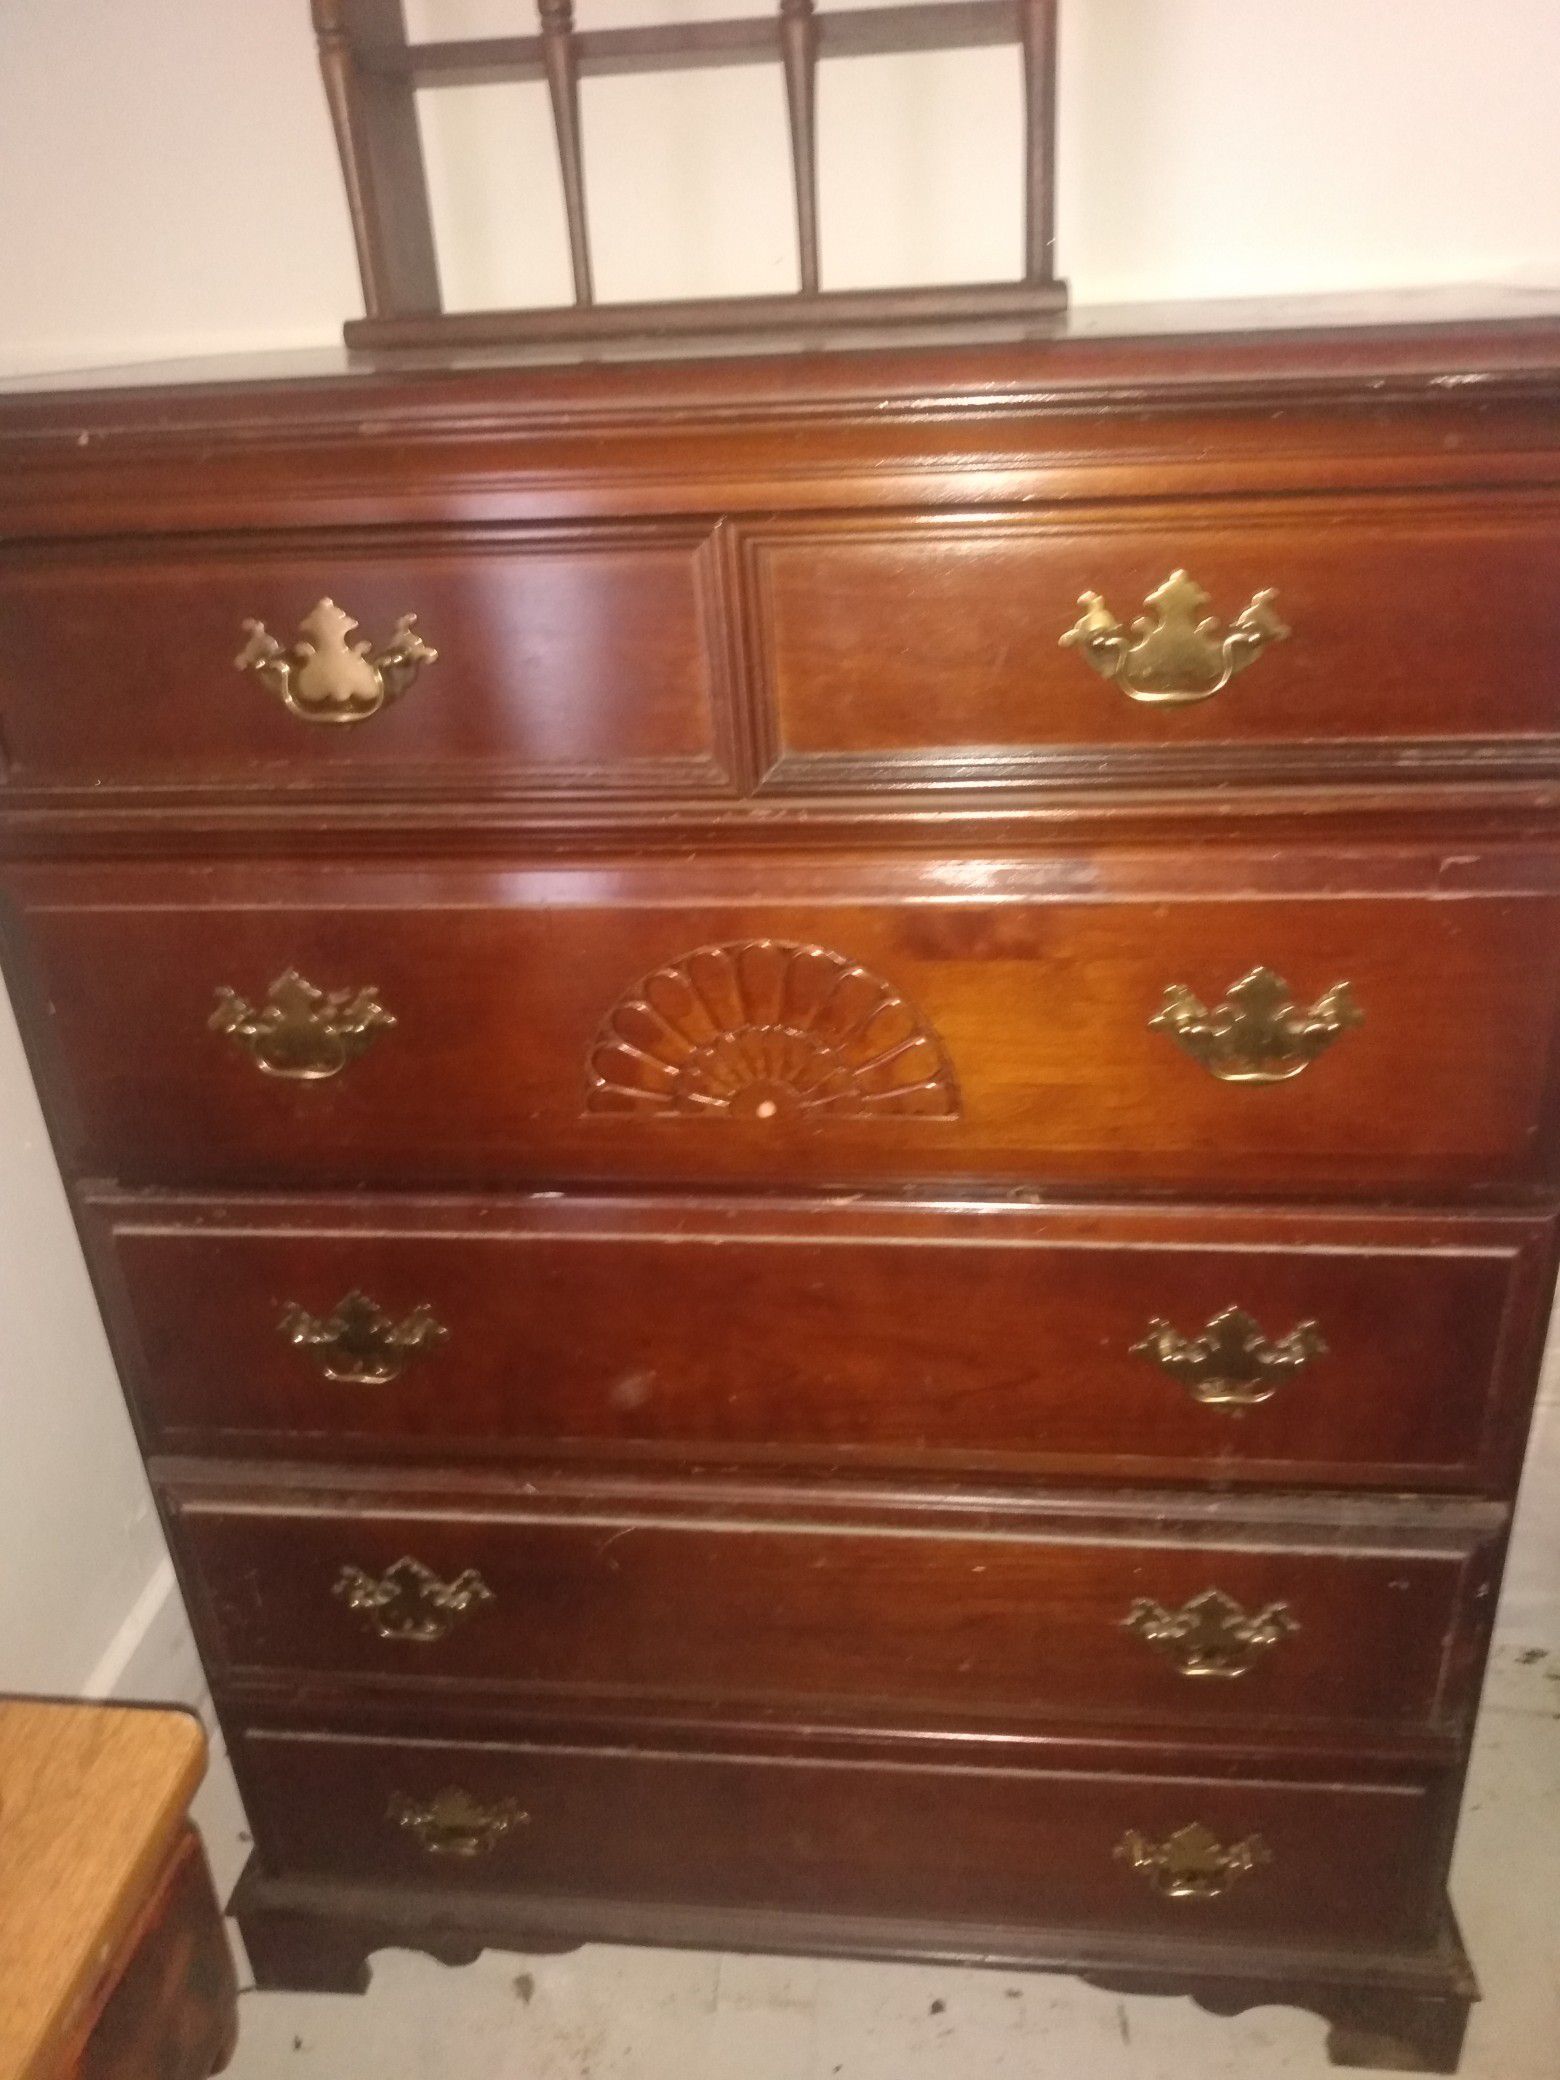 Bassett chest all the drawers work also can ad a a long dresser and a queen or full bed with rails and mirror when does for a bundle price of$200